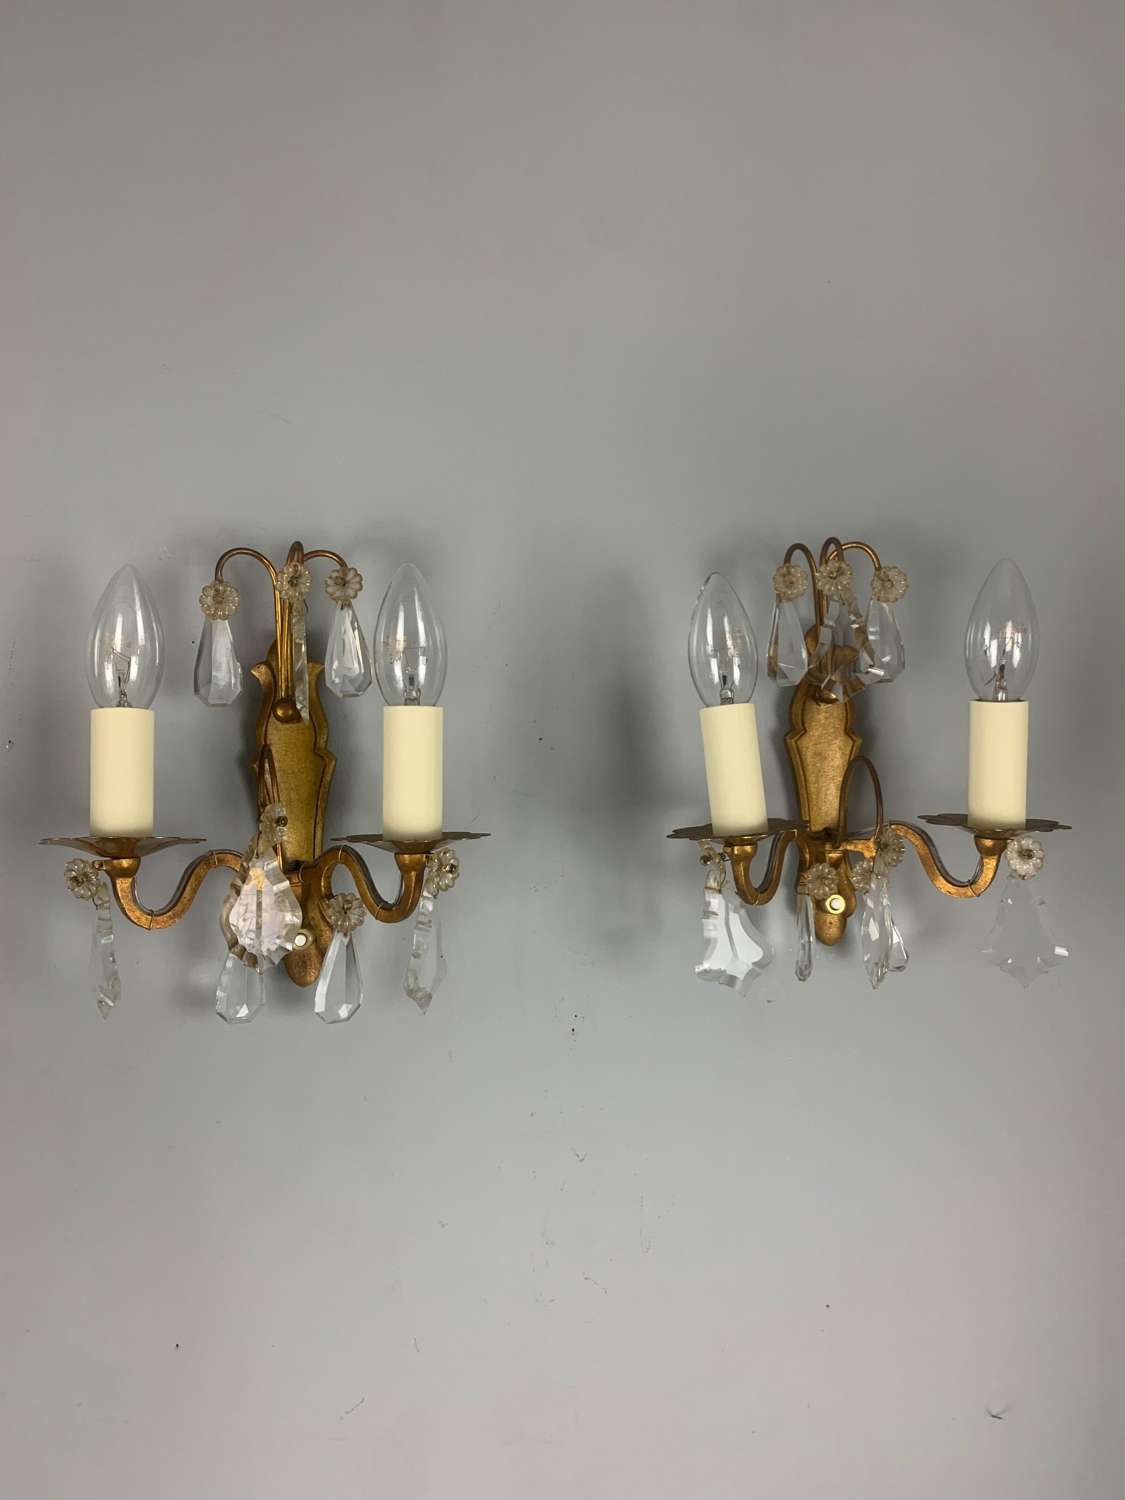 Pair Of French Antique Gilt Brass Wall Lights With Glass Droppers